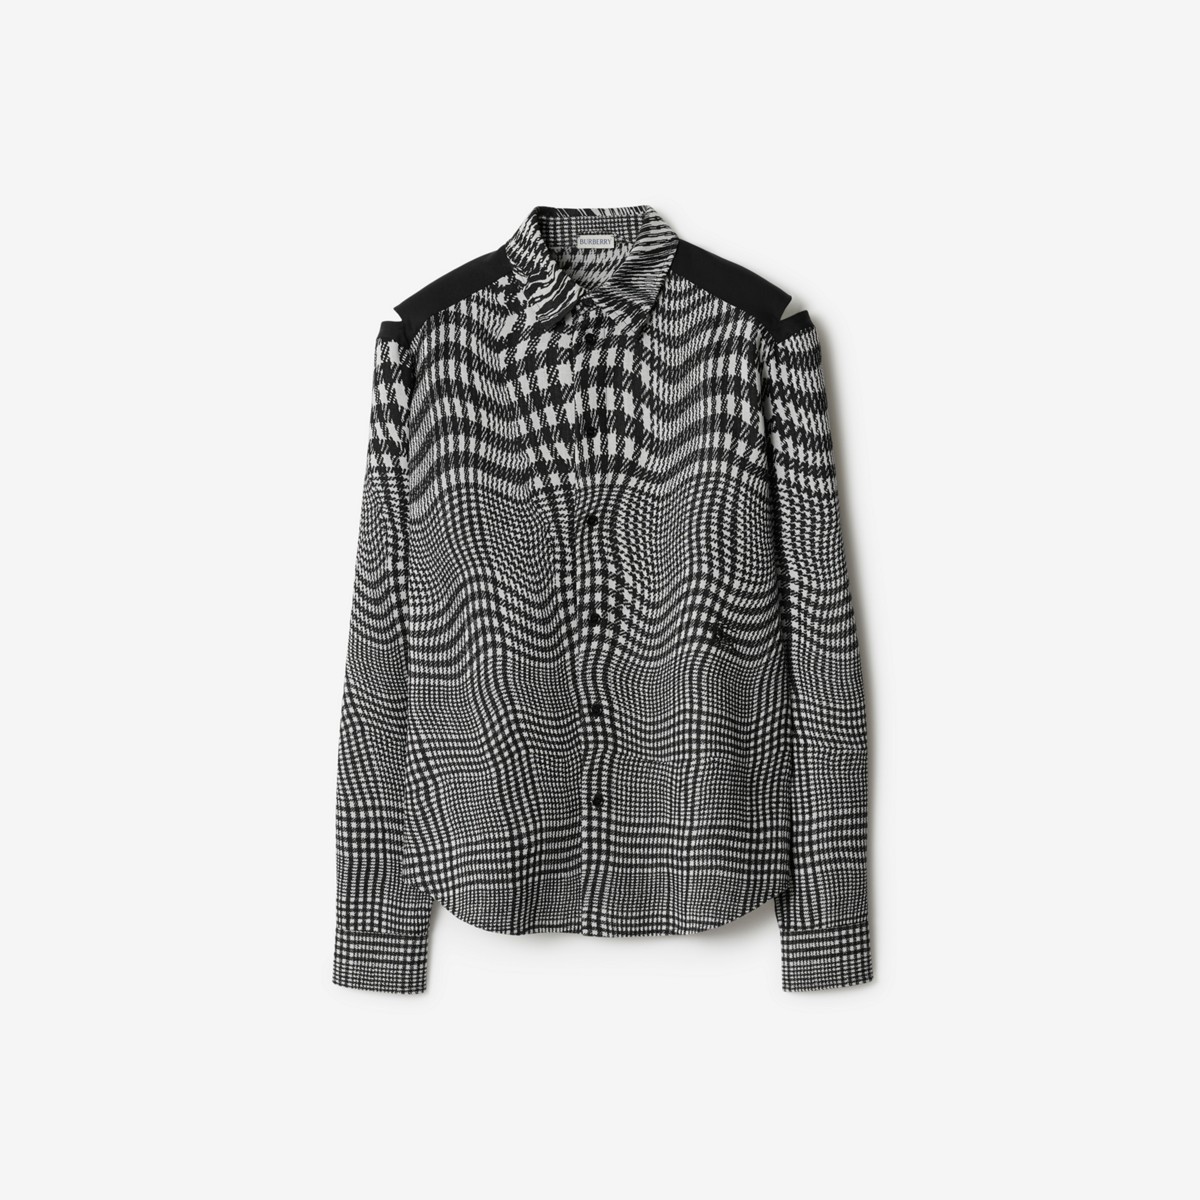 BURBERRY BURBERRY WARPED HOUNDSTOOTH WOOL SHIRT